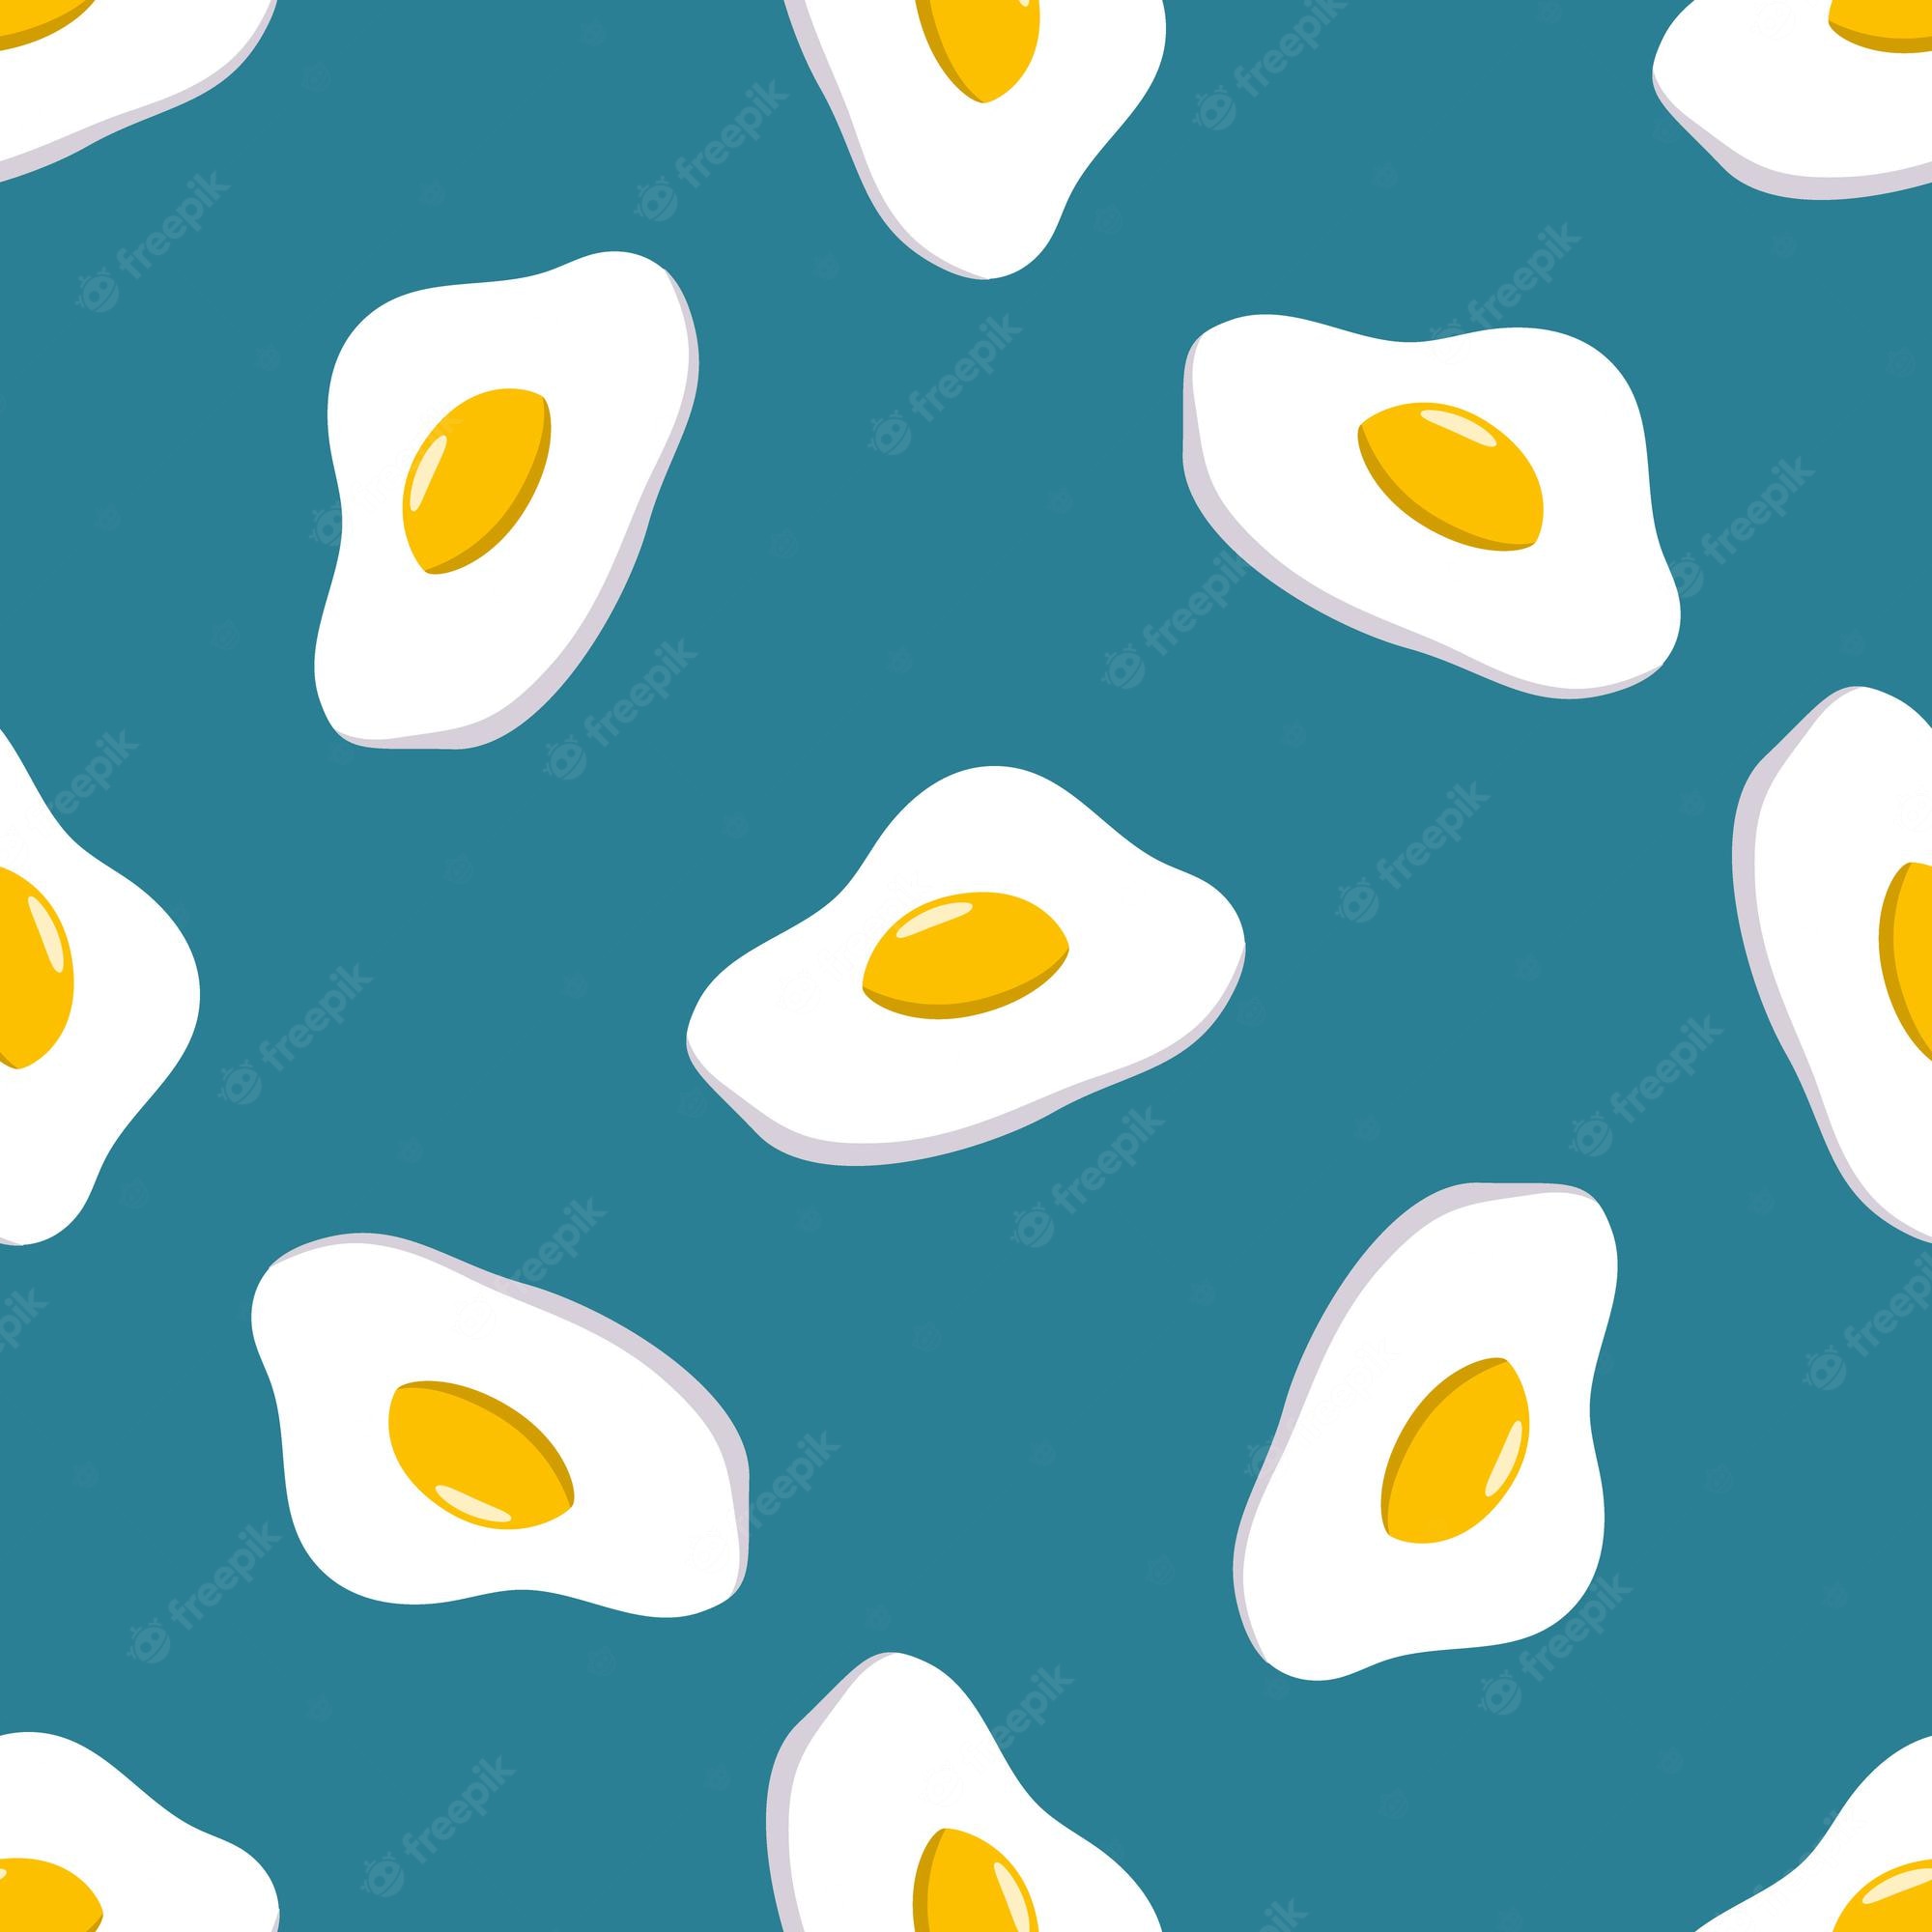 Premium Vector. A seamless pattern of a broken egg with a yolk on a green background. vector illustration in cartoon style